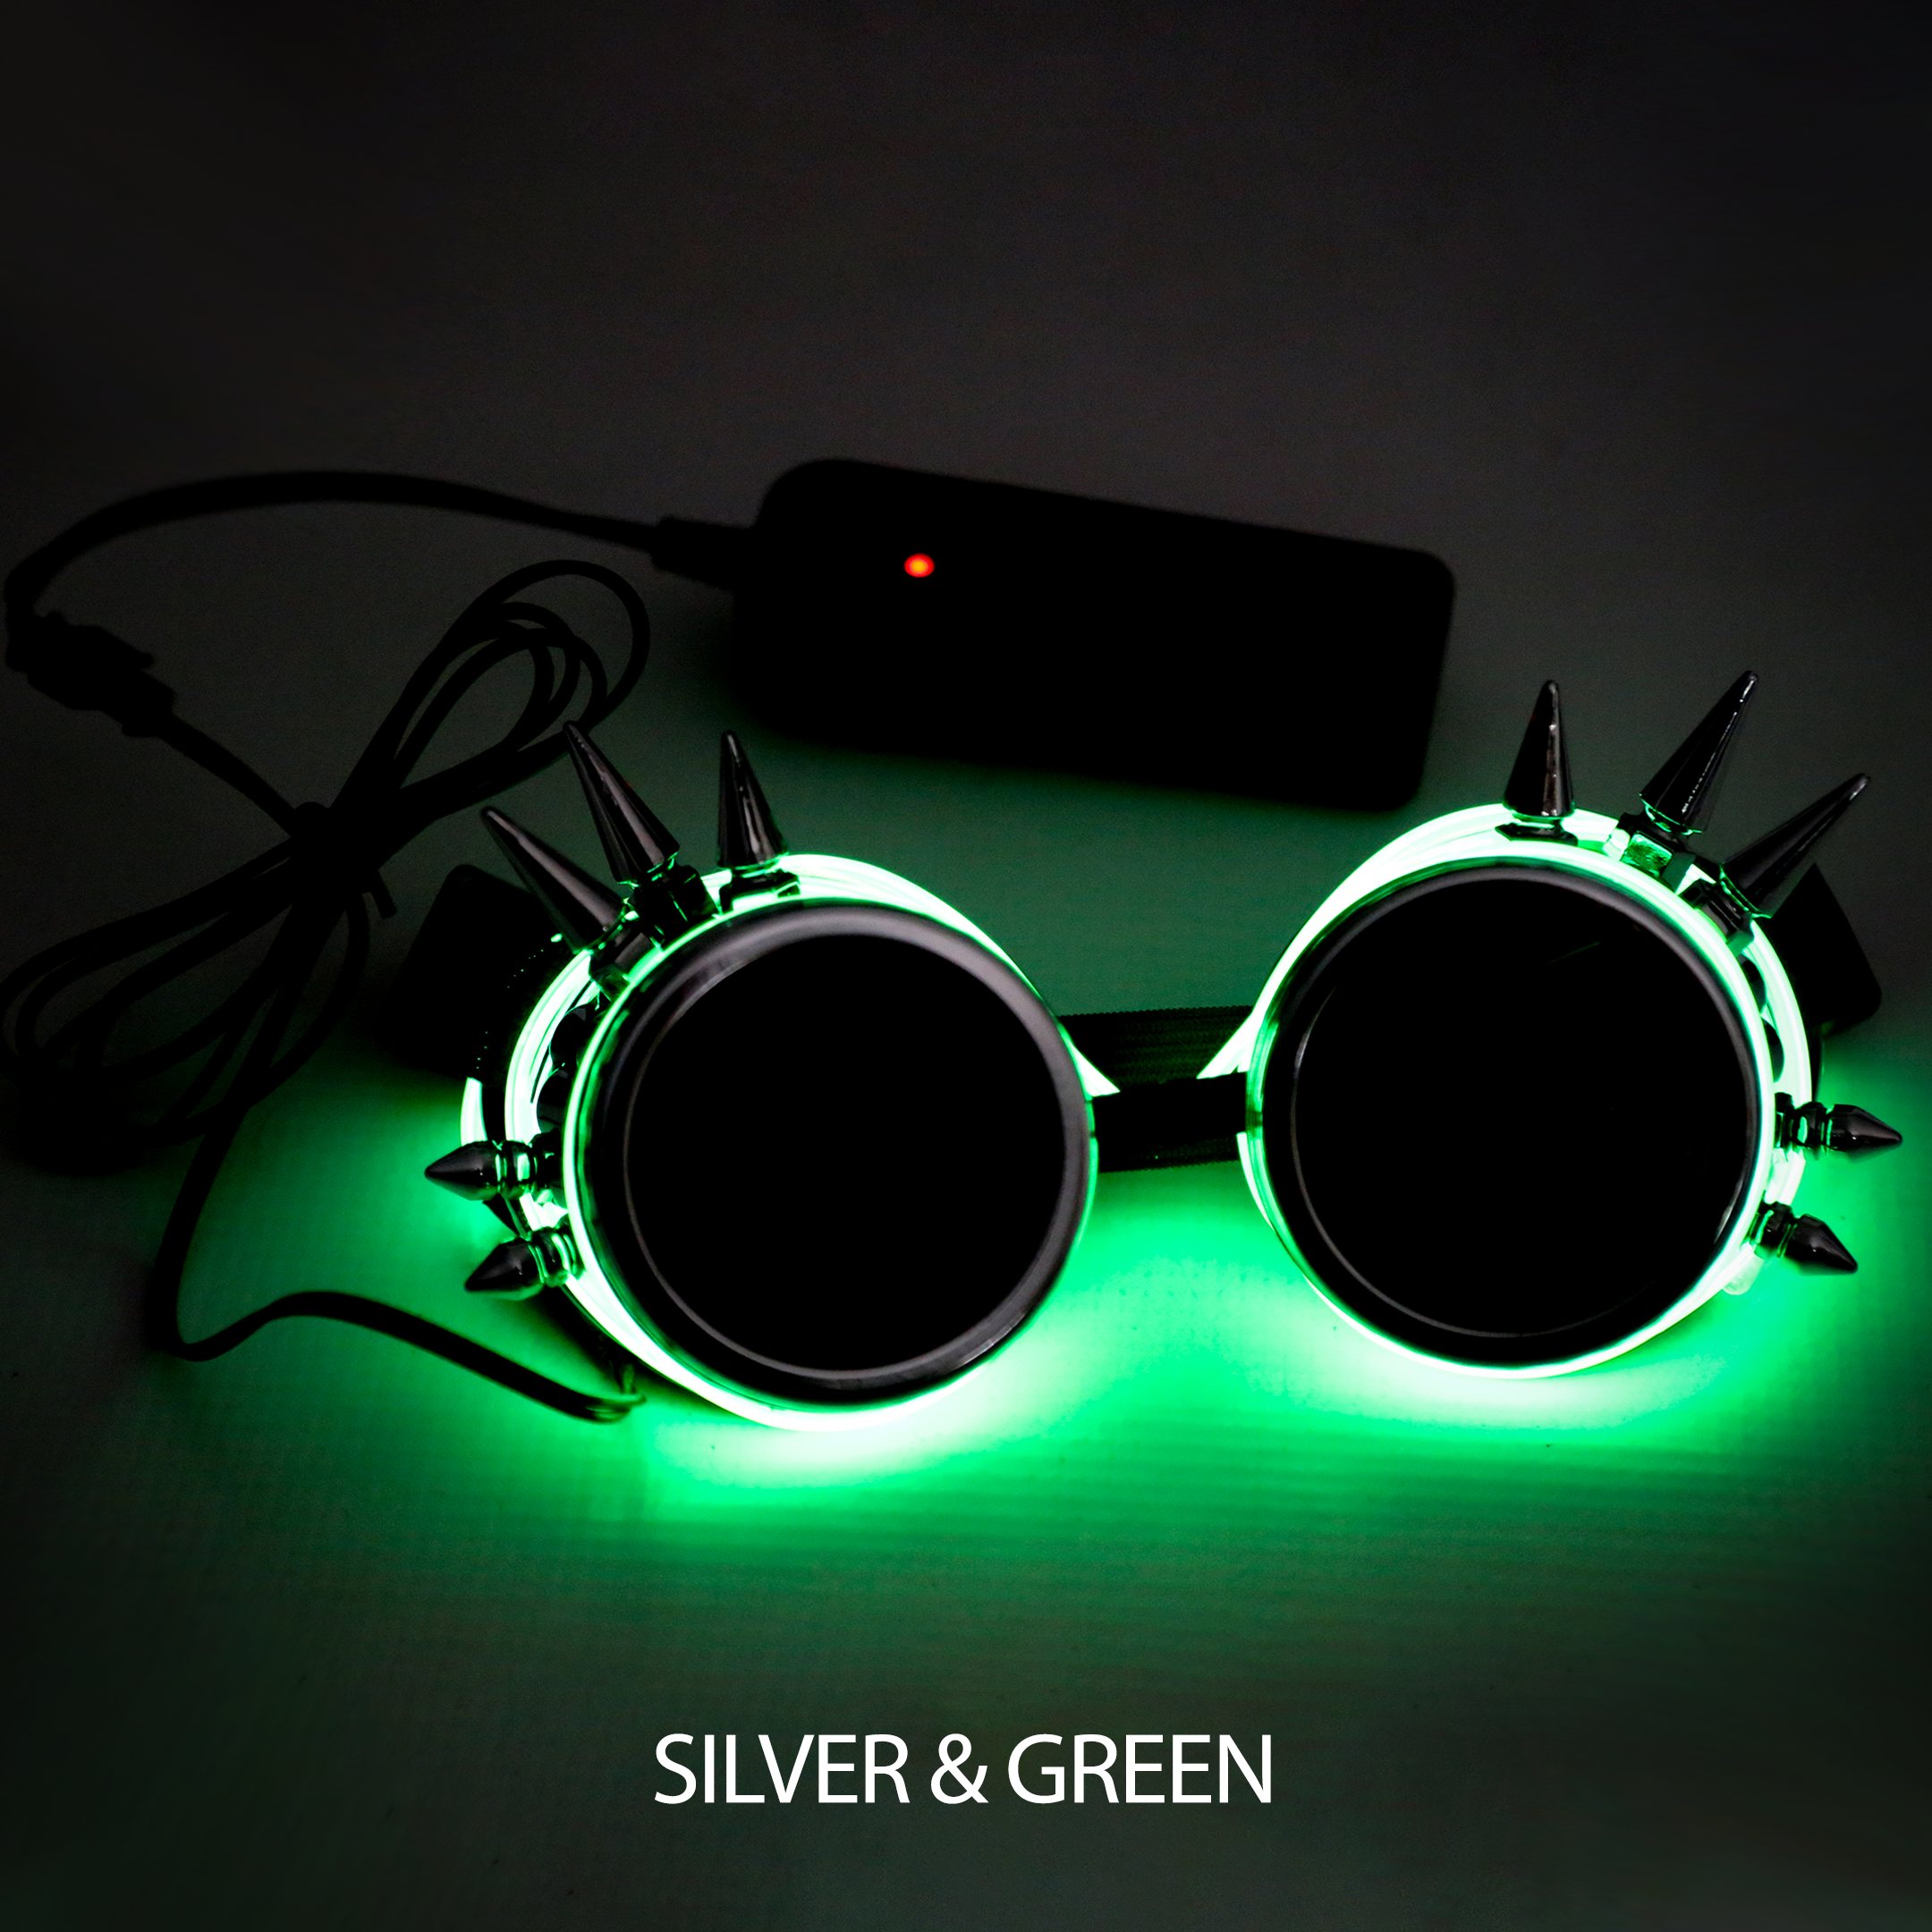 silver & green LED steampunk glasses Electro Glow | South Africa's Best LED Festival Gear & Rave Clothes - festivals outfits, clothes festival, festival clothing south africa, festival ideas outfits, festival outfits rave, festival wear, steam punk goggle, rave glasses, outfit for a rave, kaleidoscope glasses, diffraction glasses, clothes for a rave, rave sunglasses, spectral glasses, rave goggles, clothes for a rave, rave clothing south africa, festival wear south africa, accessories festival